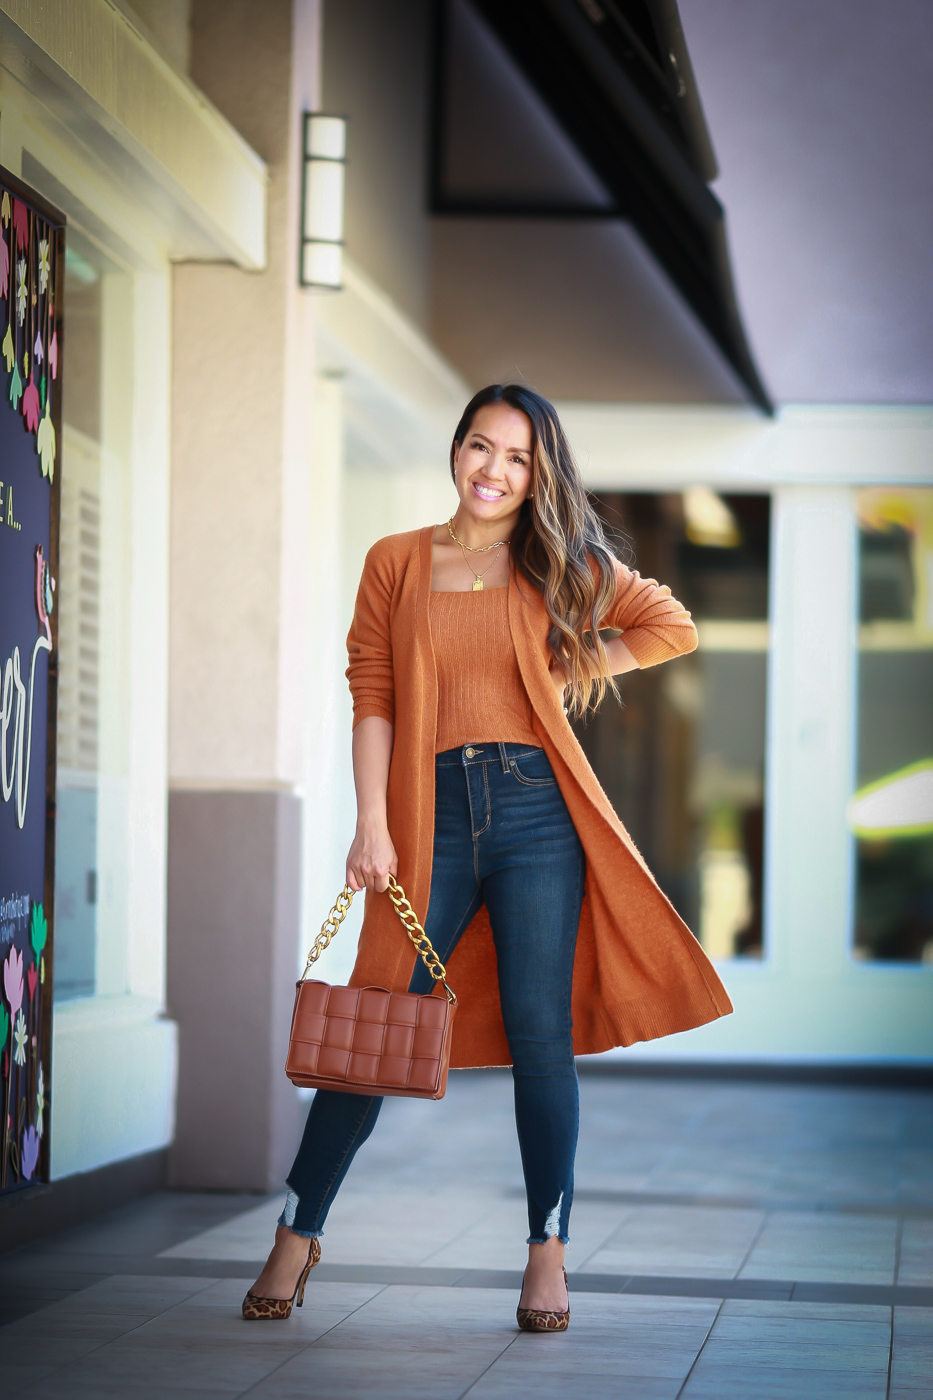 Affordable Casual Fall Outfit for under $25 - Stylish Petite